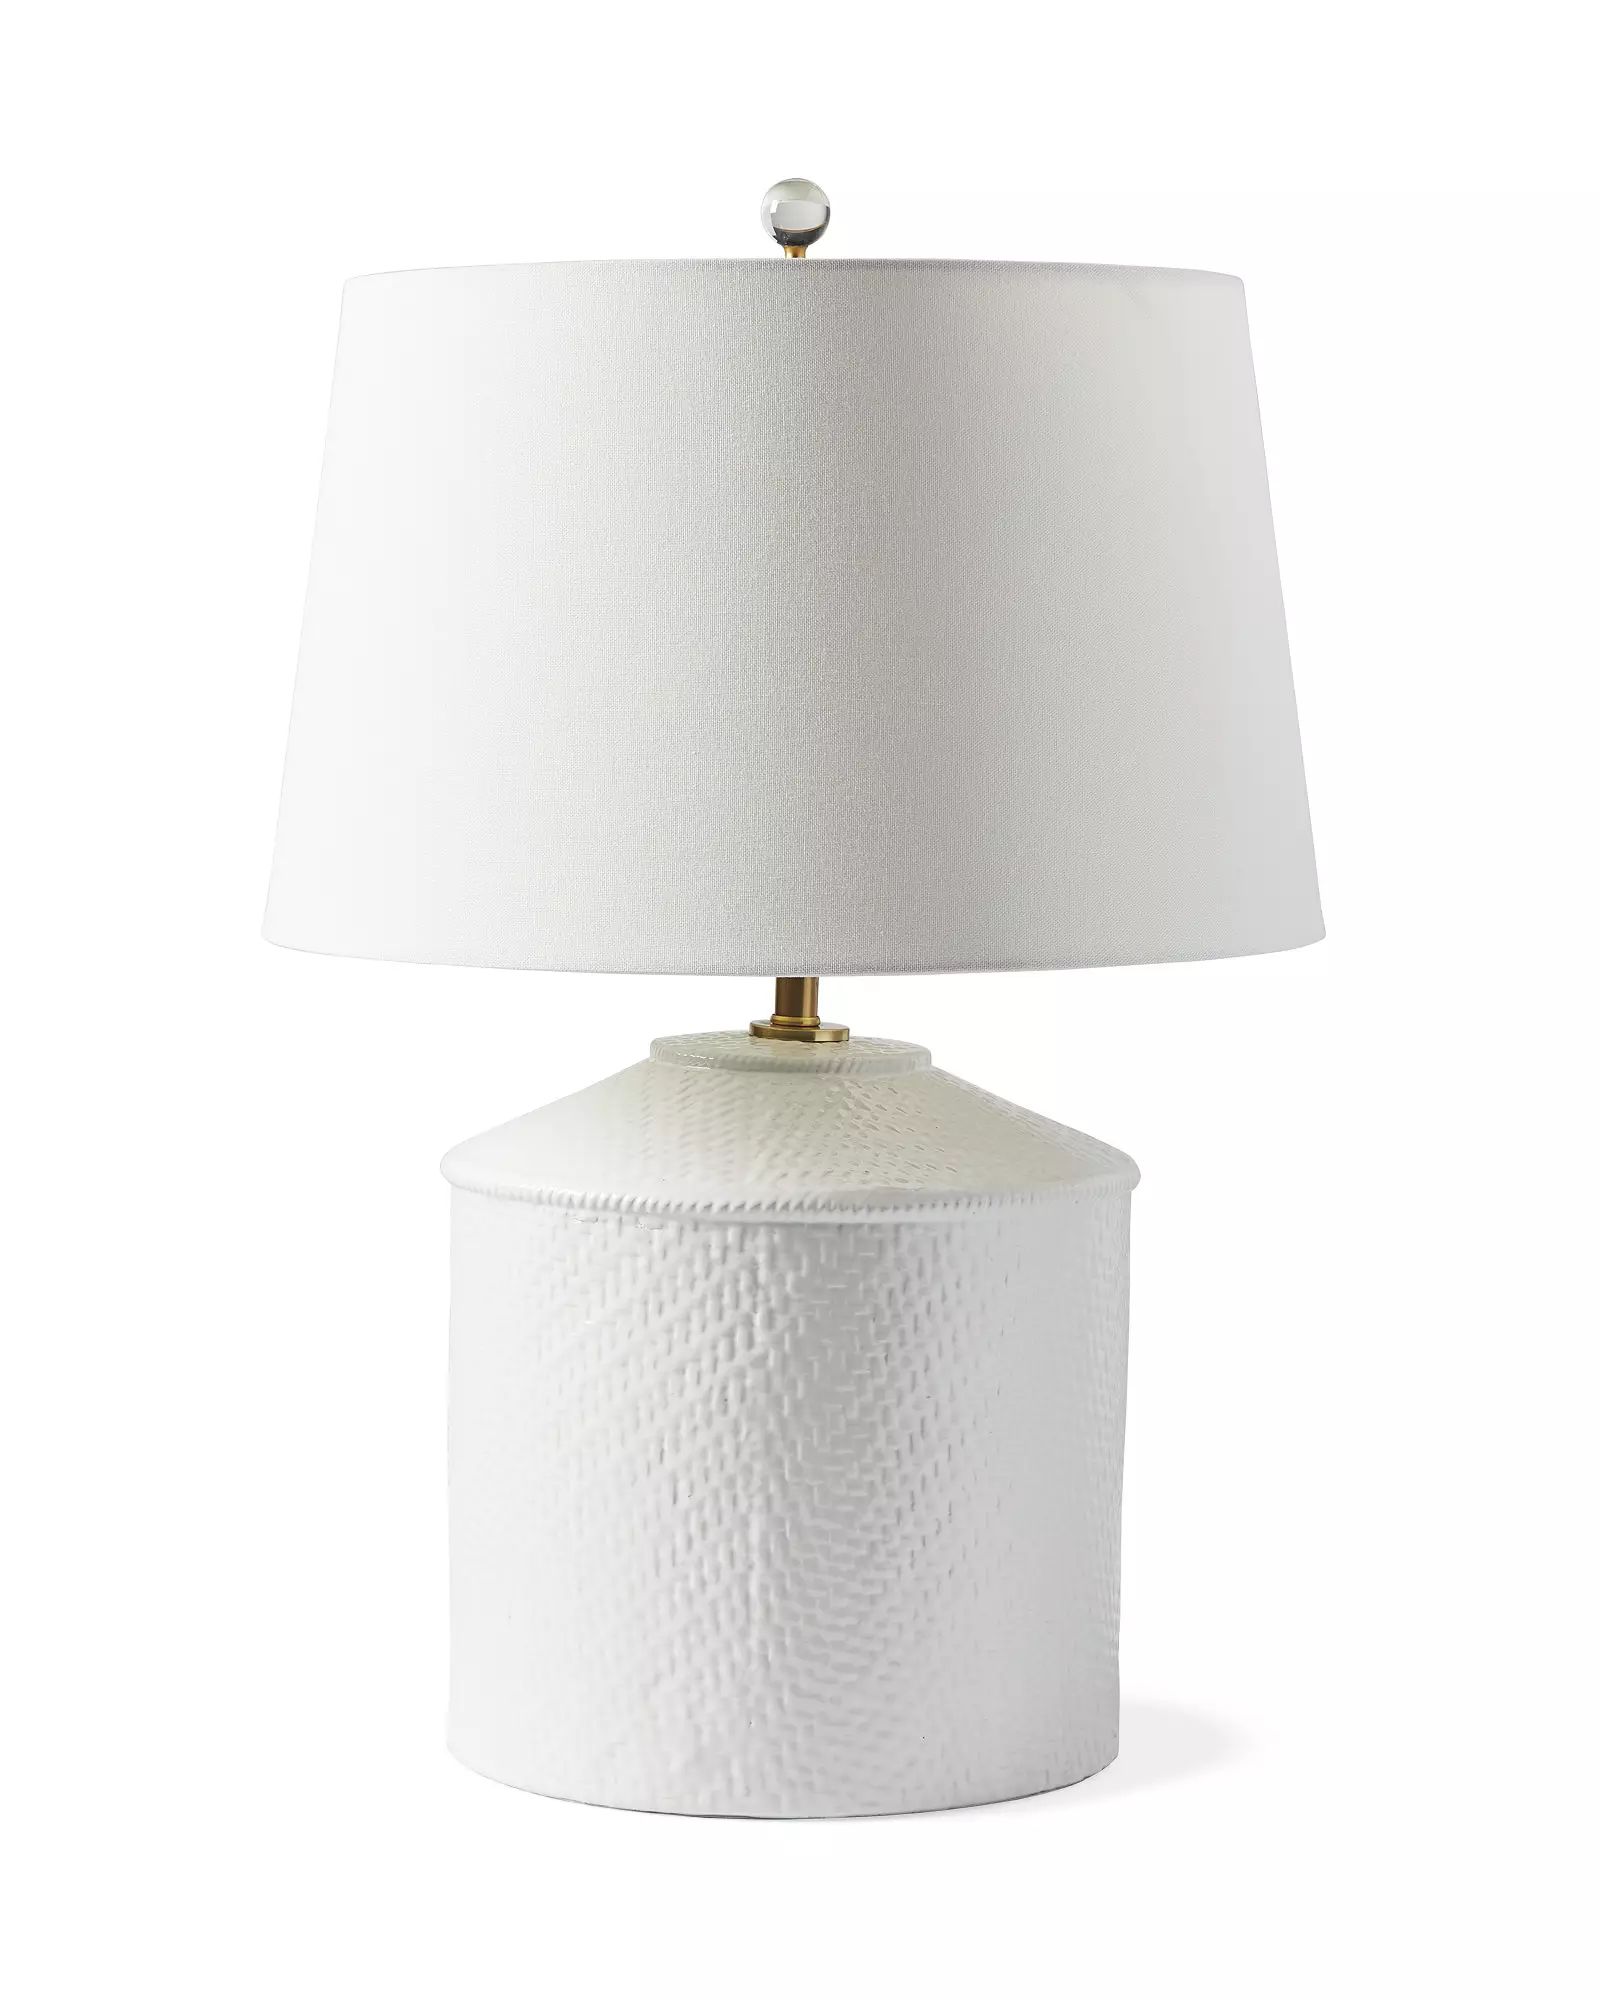 Yorkville Table Lamp | Serena and Lily